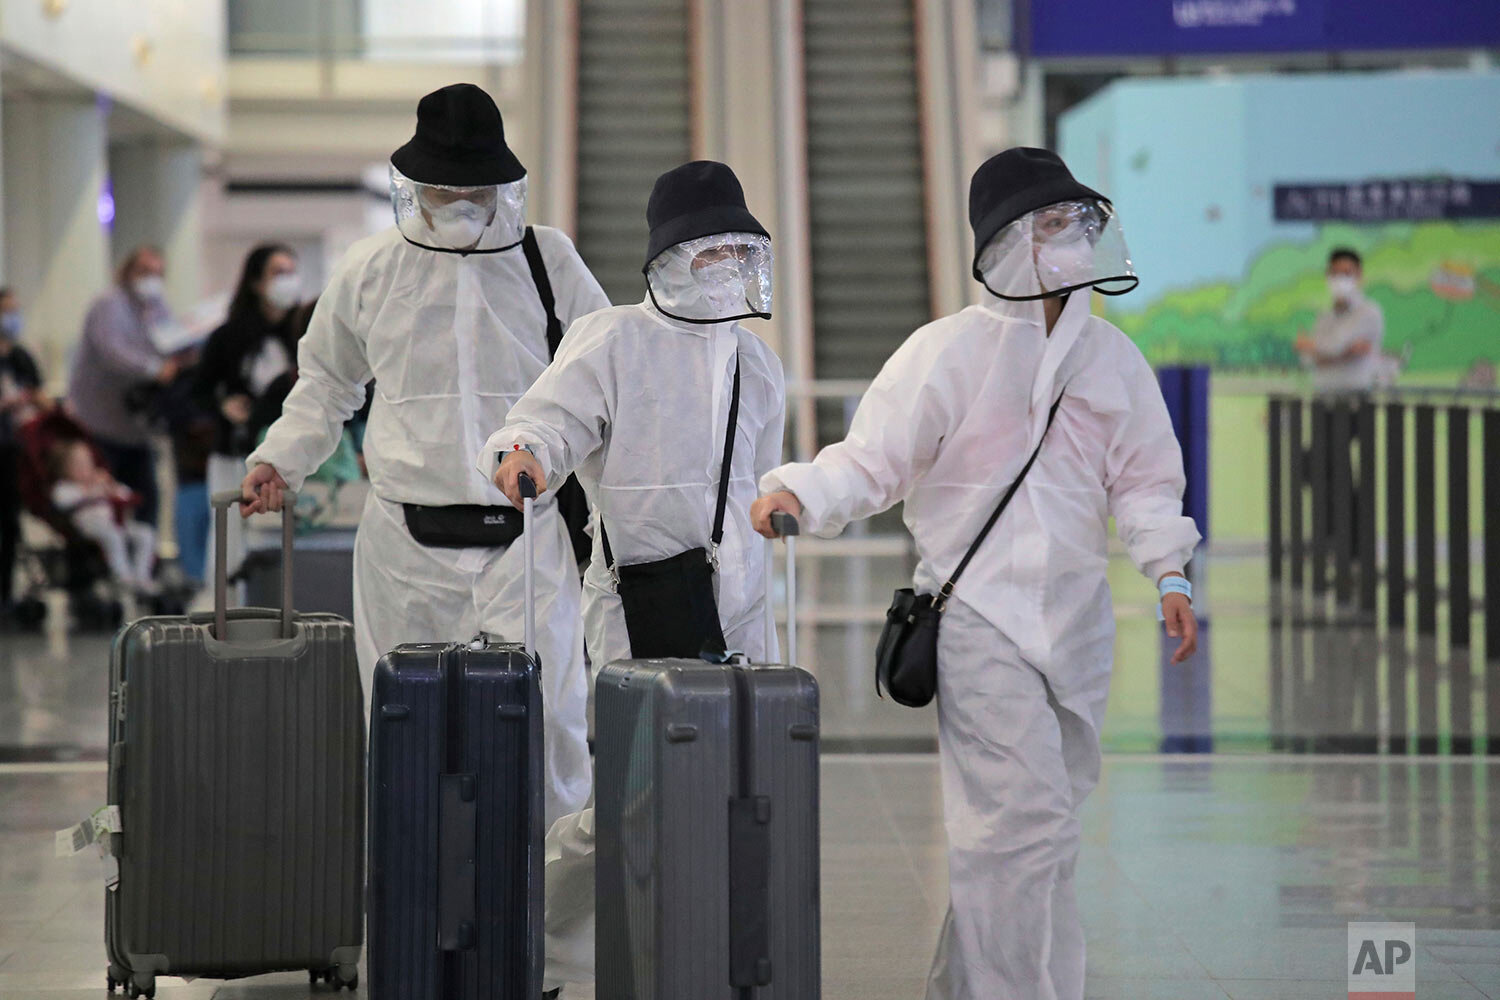  Passengers wear protective suits and face masks as they arrive at the Hong Kong airport, Monday, March 23, 2020.  (AP Photo/Kin Cheung) 